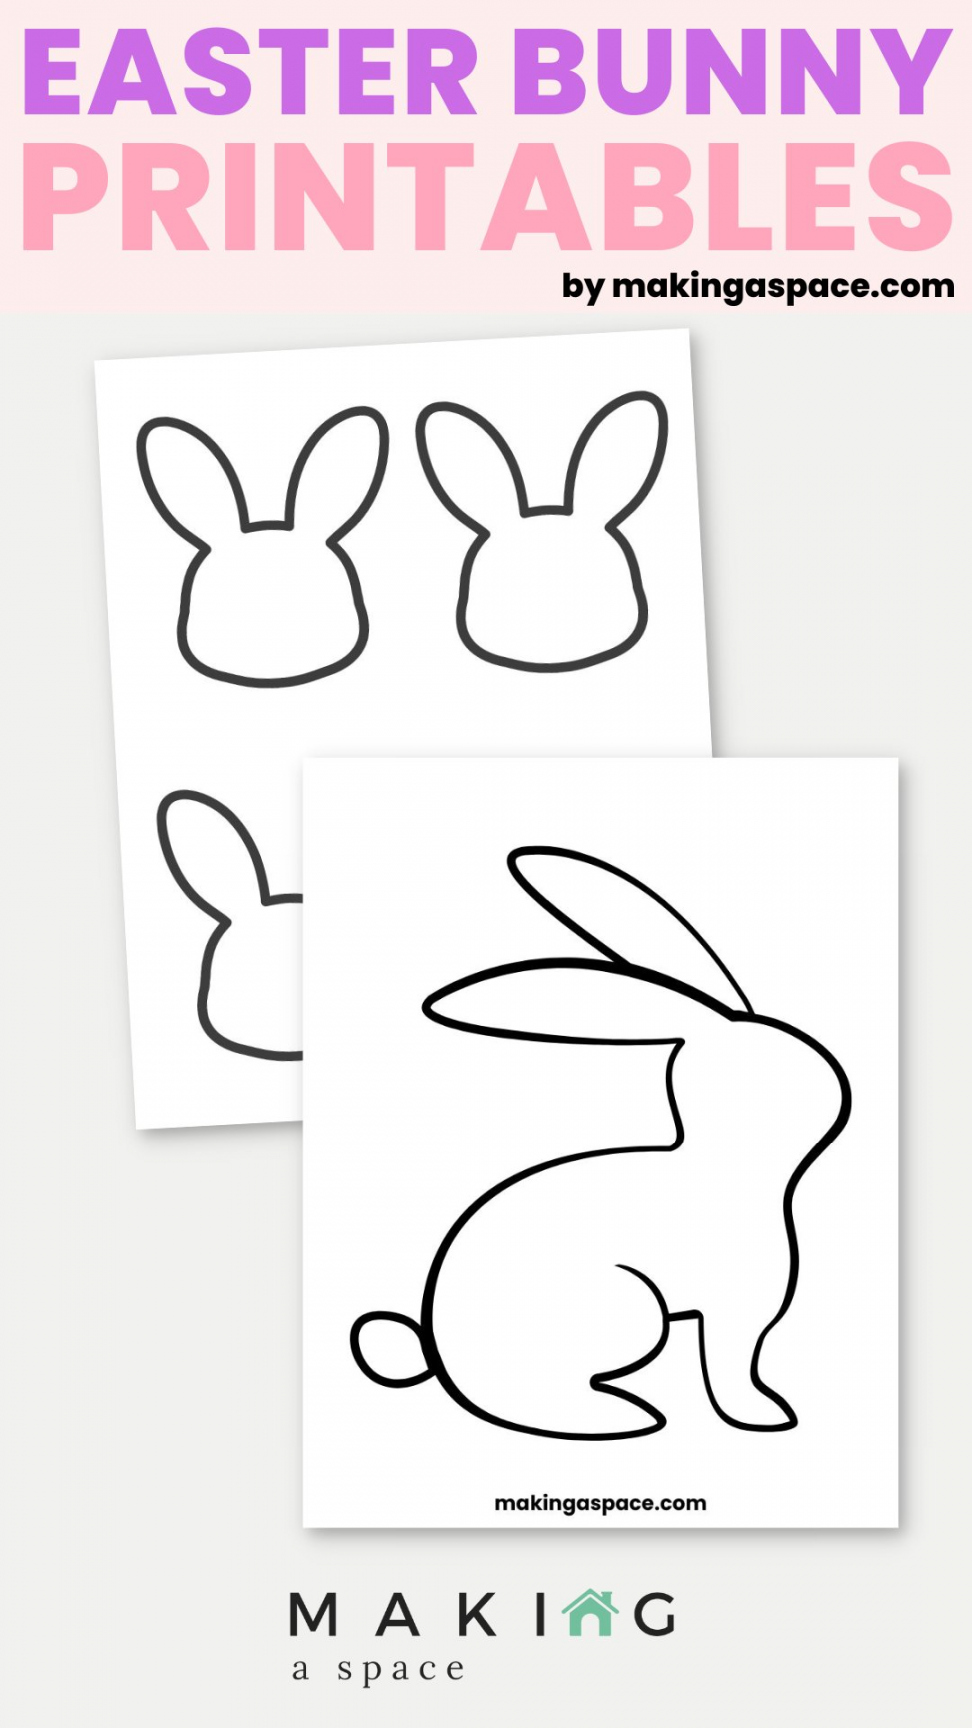 Free Printable Easter Bunny Templates - Making A Space - FREE Printables - Free Printable Easter Bunny Template